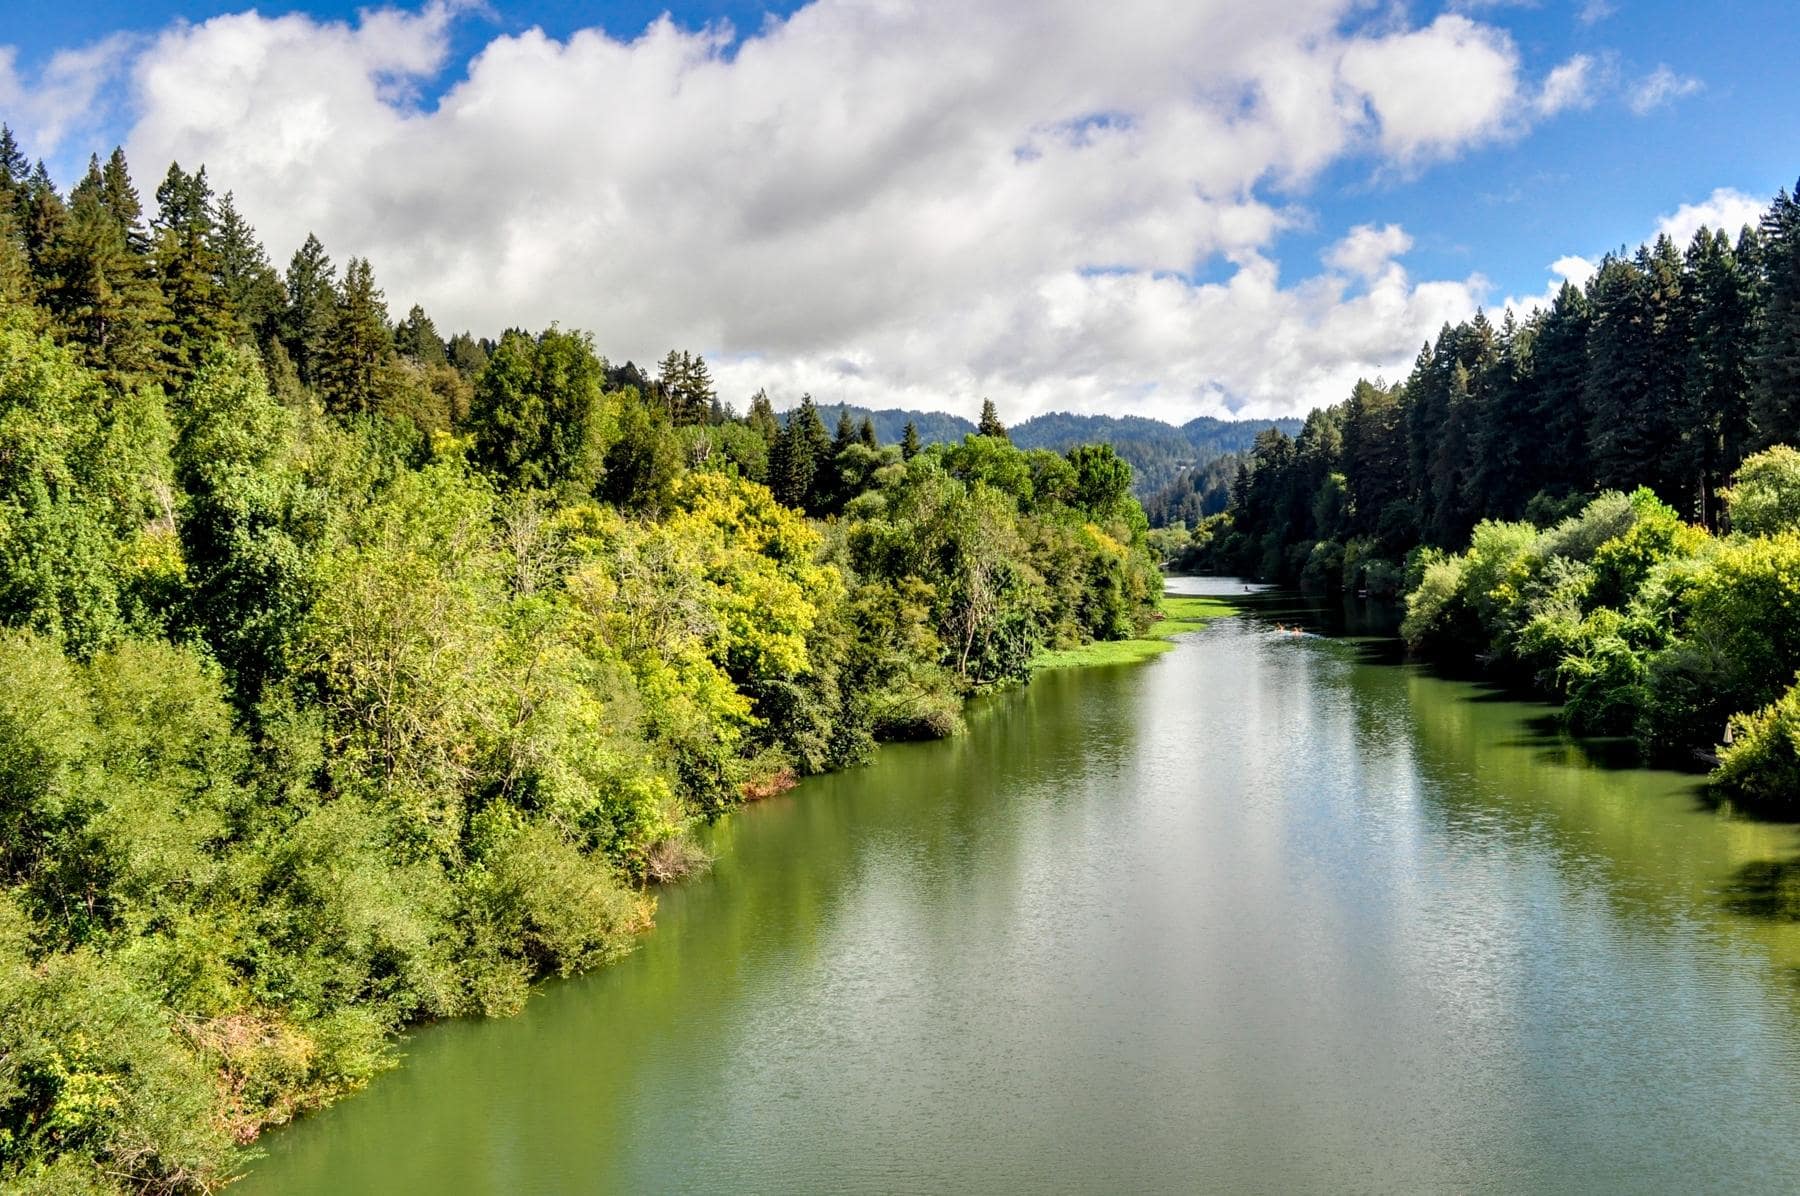 Guerneville, CA: Get away from everything (including cell coverage).